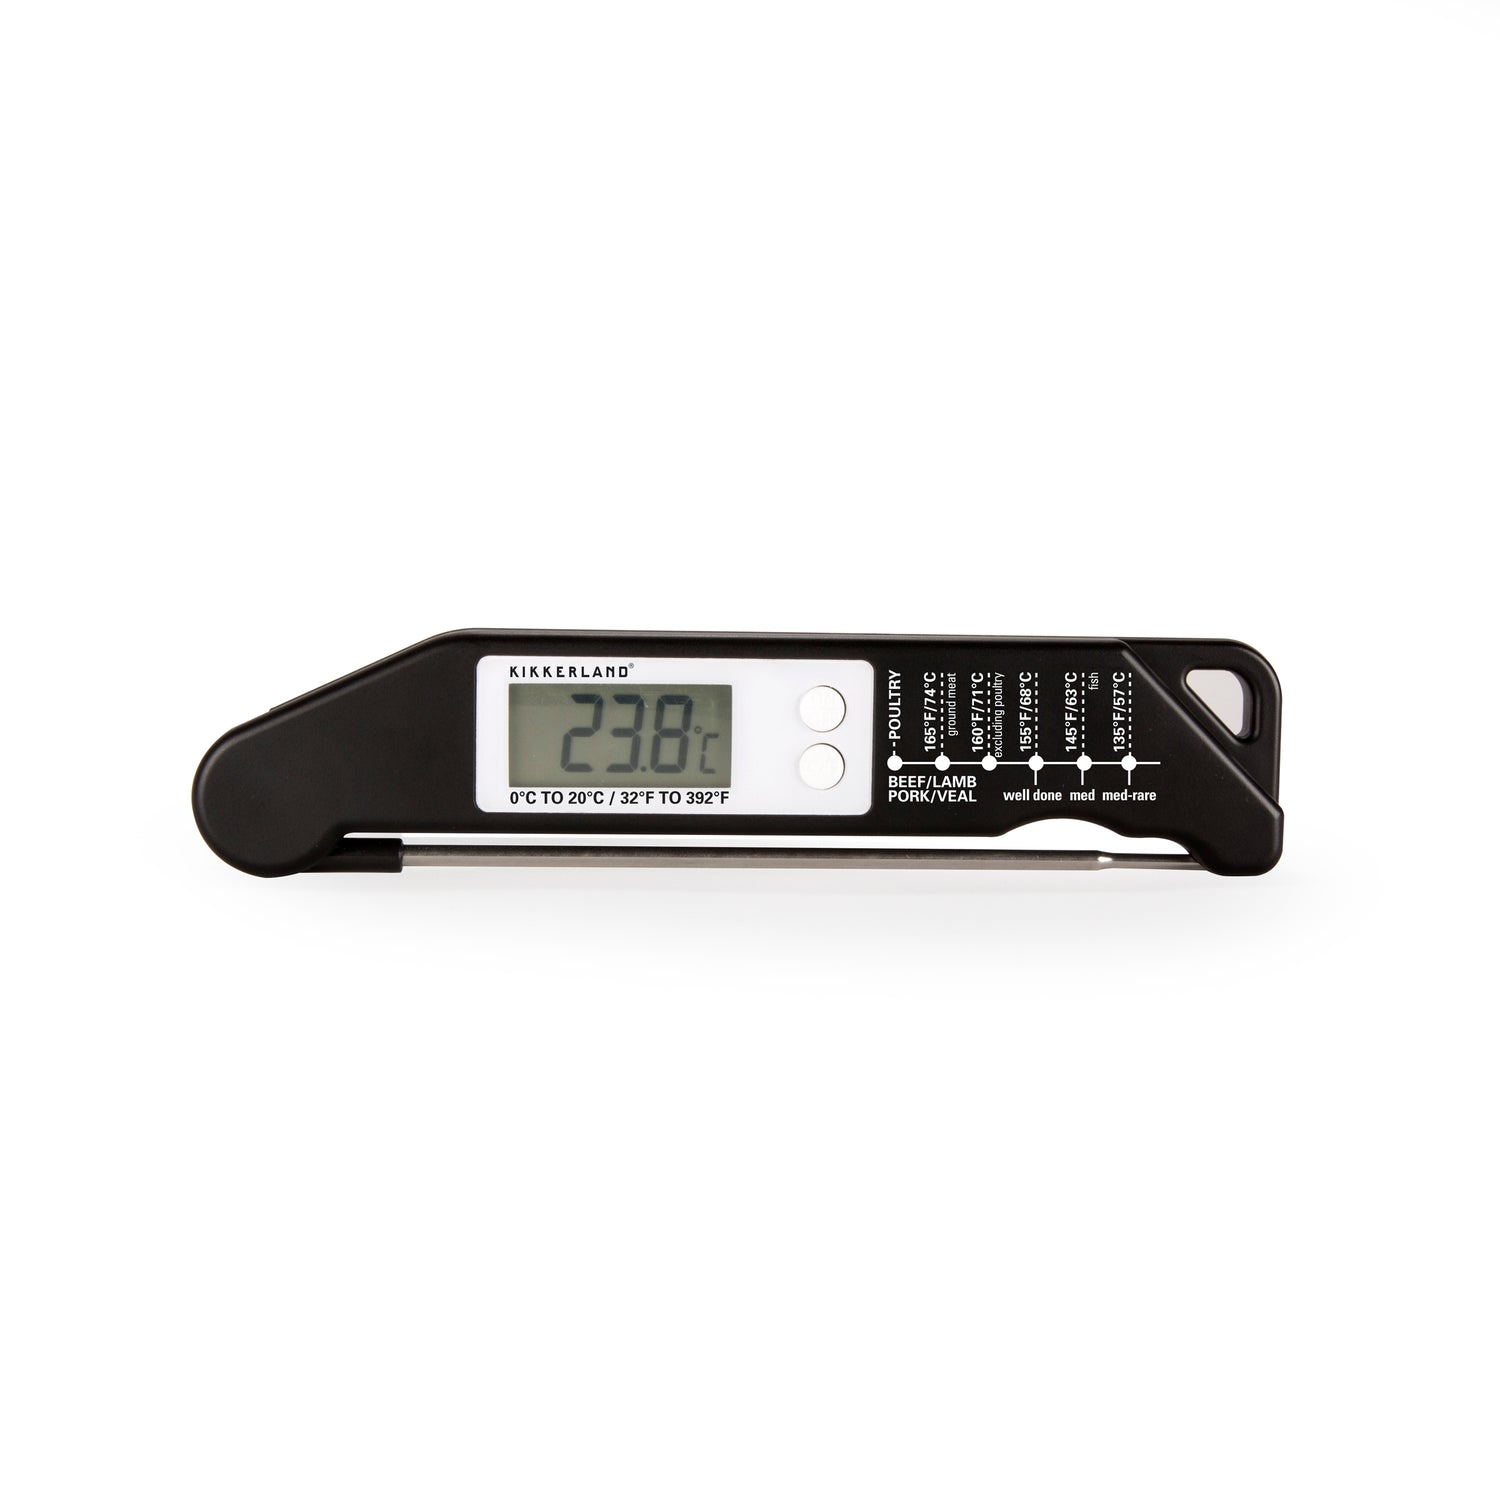 BBQ-thermometer